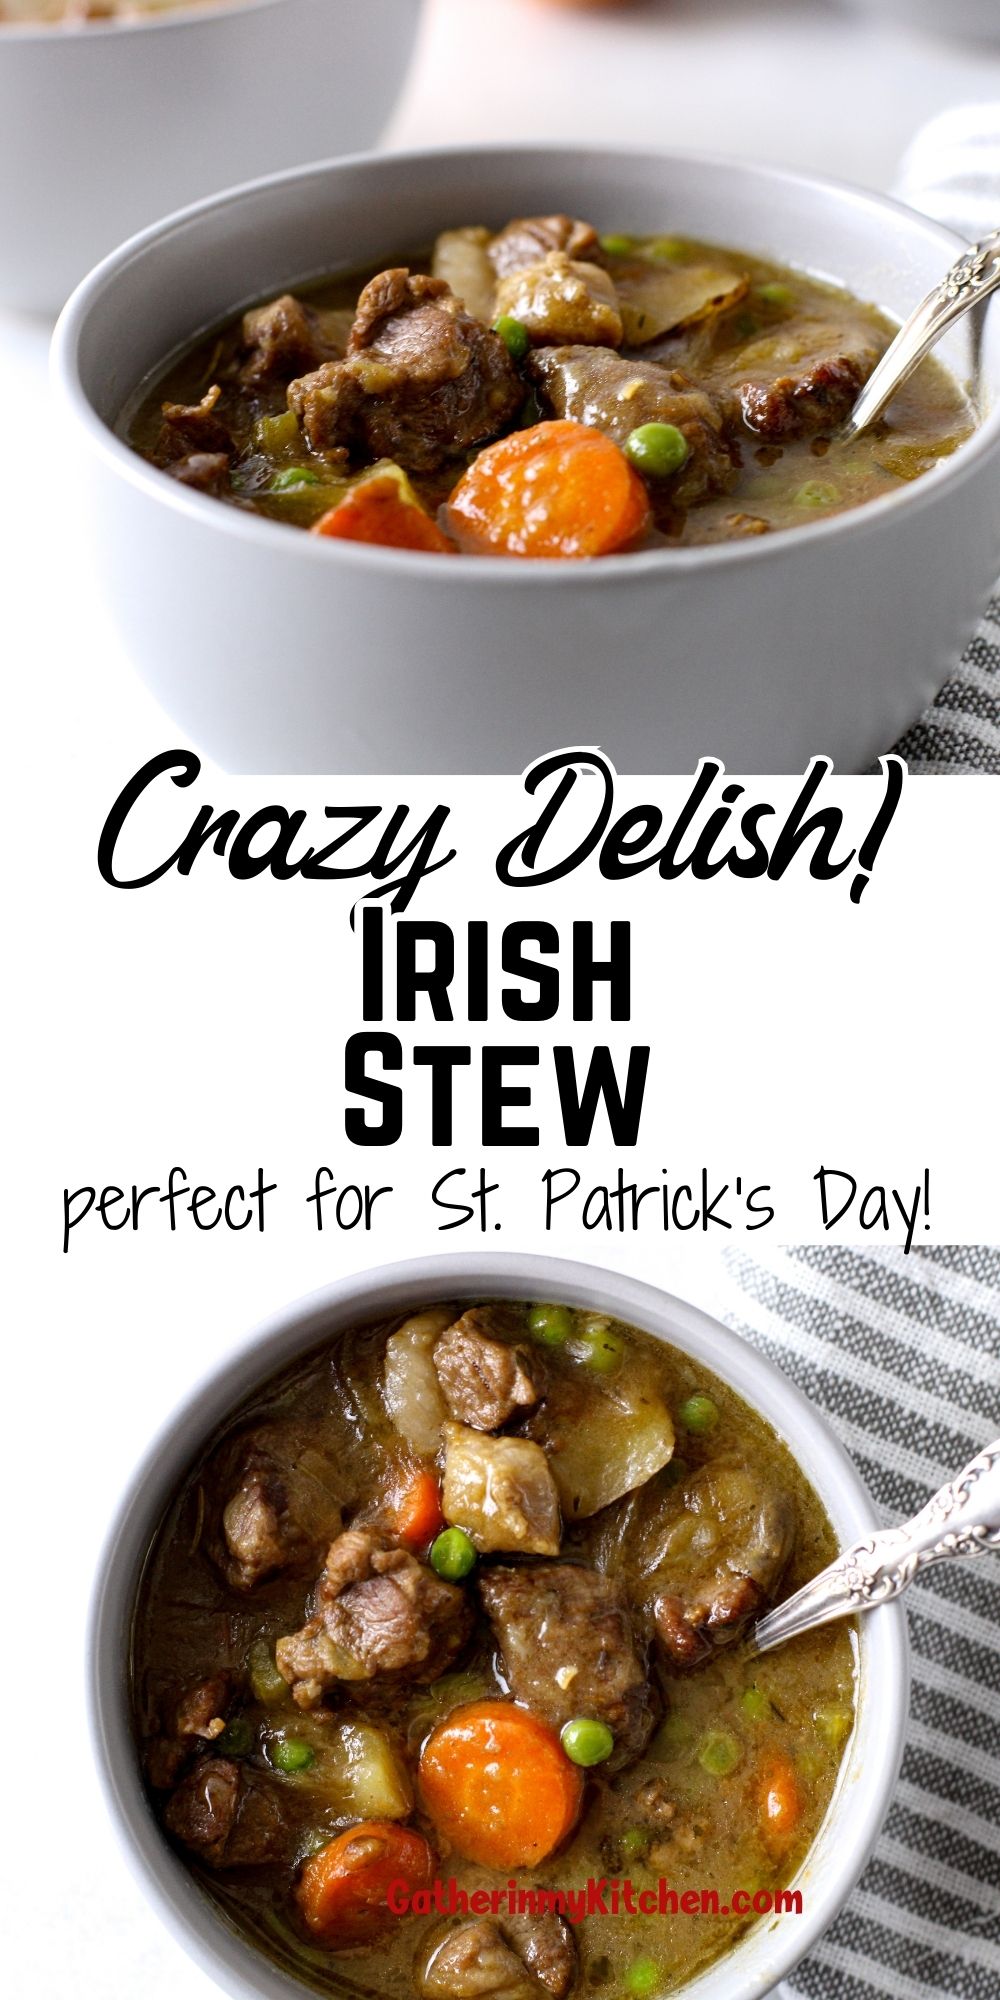 Pin image: top and bottom are pics of Irish stew and middle says "Crazy Delish! Irish Stew perfect for St. Patrick's Day!".